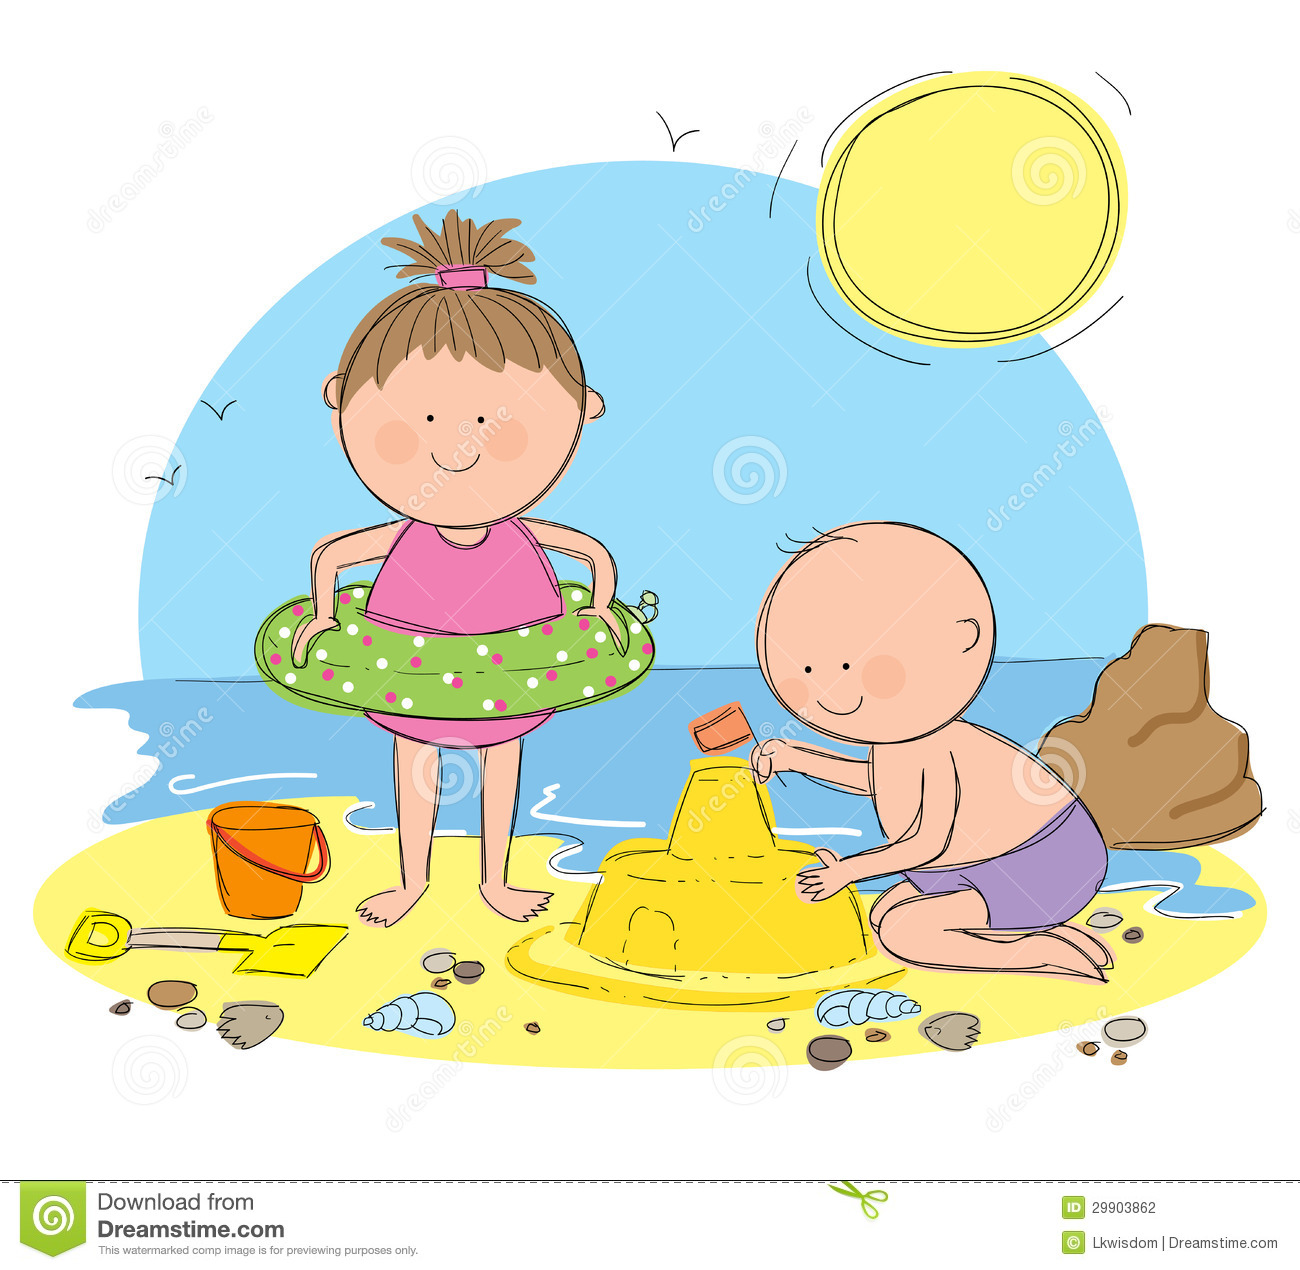 Hand Drawn Picture Of Children Playing On The Beach  Illustrated In A